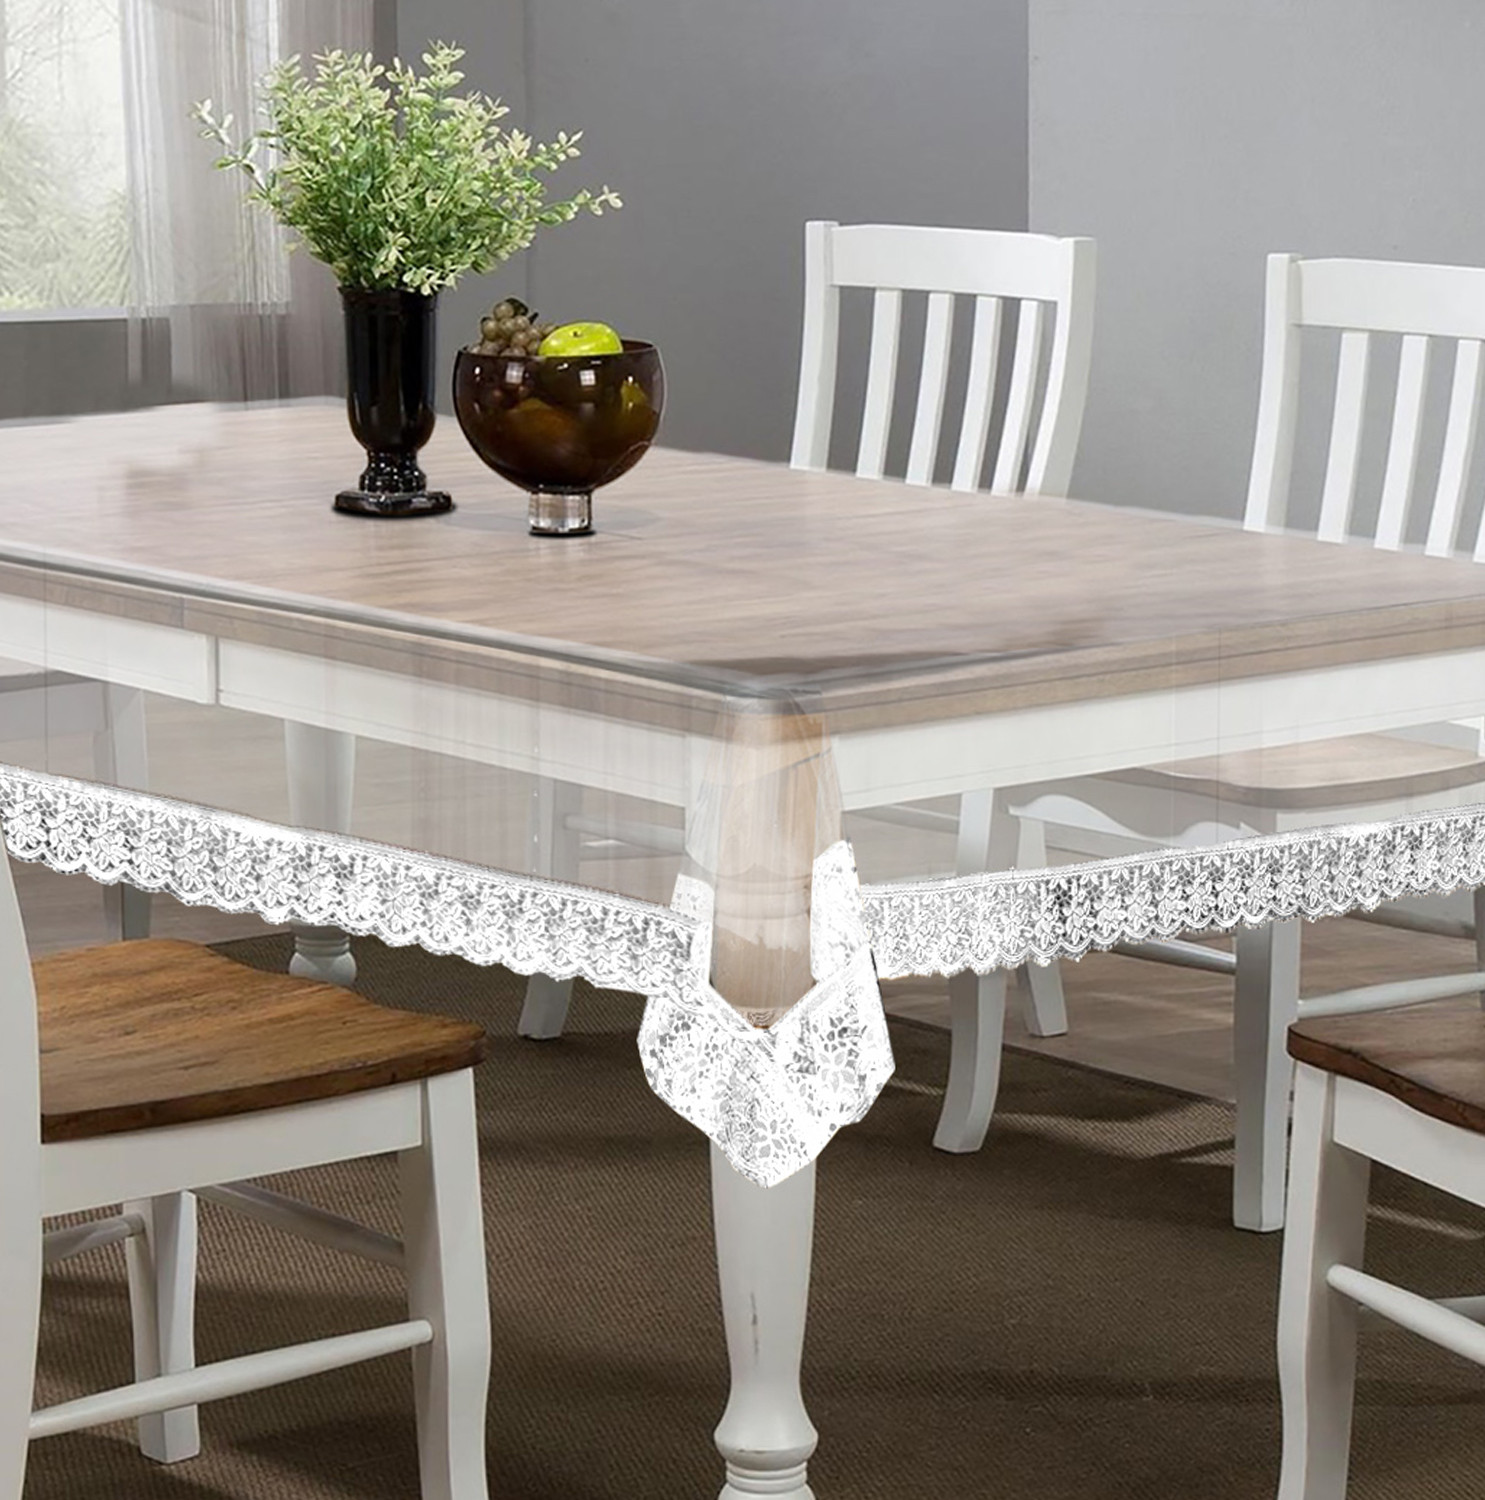 Kuber Industries Transparent 4 Seater PVC Dining Table Cover, Protector With White Lace Border, 45